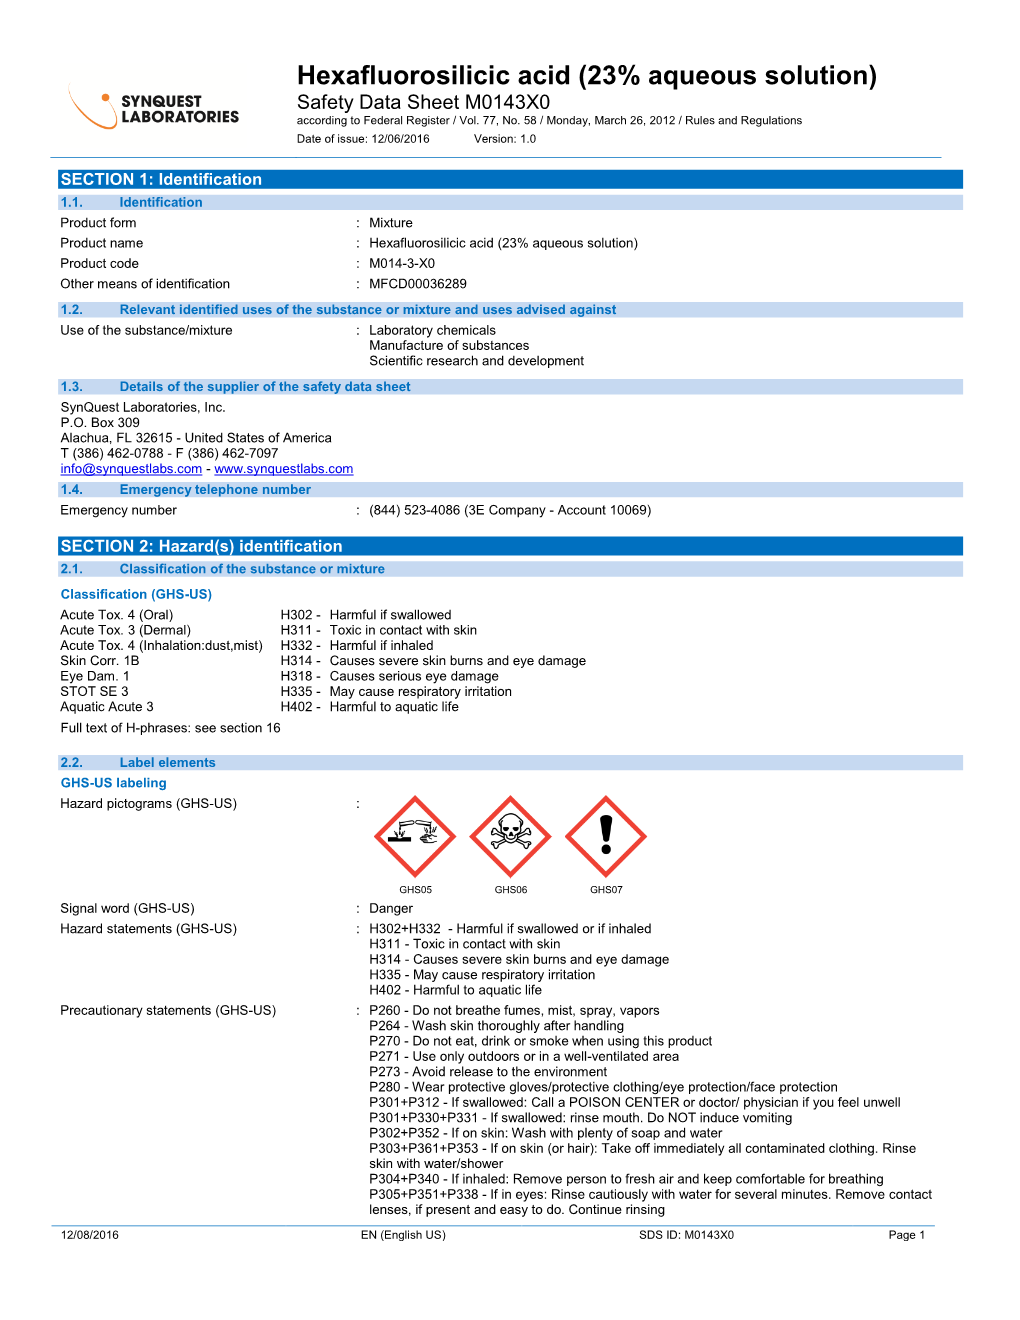 Hexafluorosilicic Acid (23% Aqueous Solution) Safety Data Sheet M0143X0 According to Federal Register / Vol